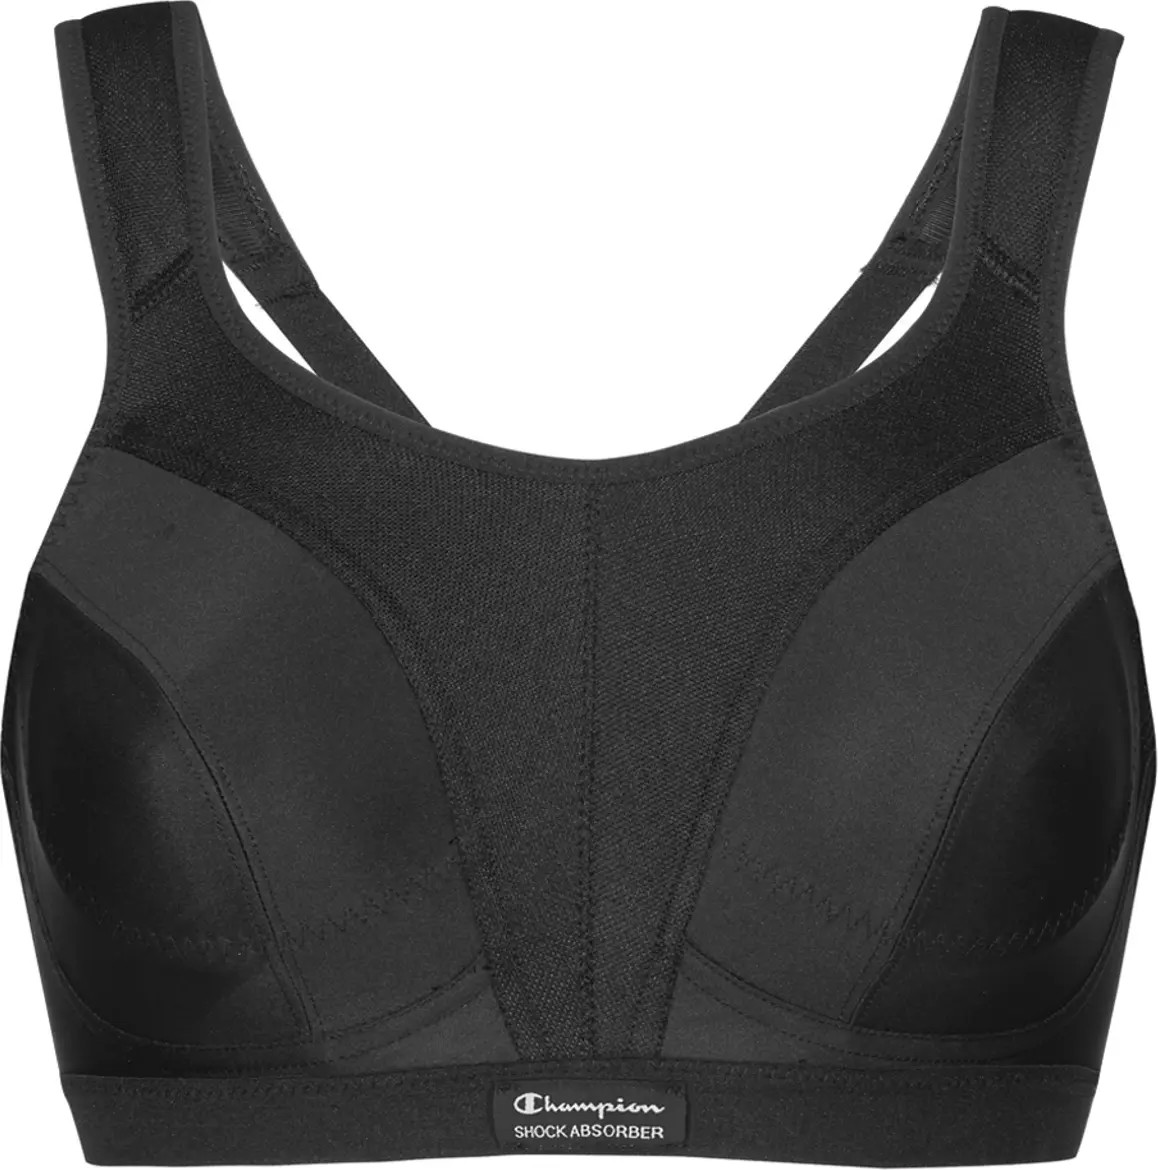 Women Active High Impact Sports Bra Full Coverage Non Padded Underwire  Adjustable Full Figure Support Workout Bra 40 42 D DD E F, Beyondshoping